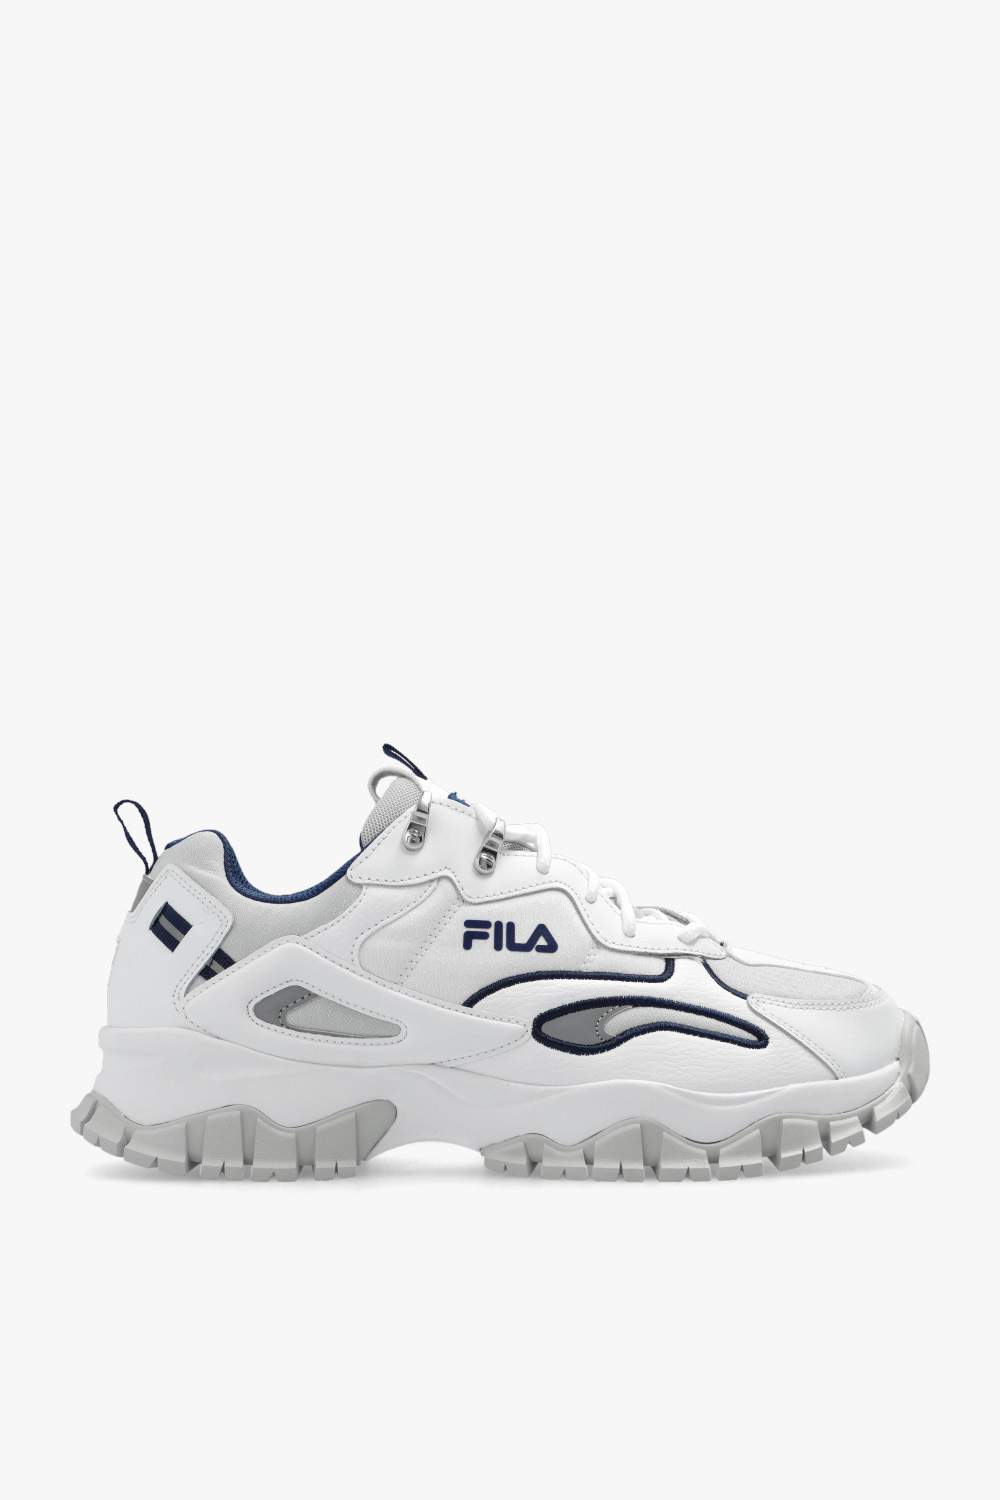 fila men's uproot basketball shoes Mens Multicolour Trainers White